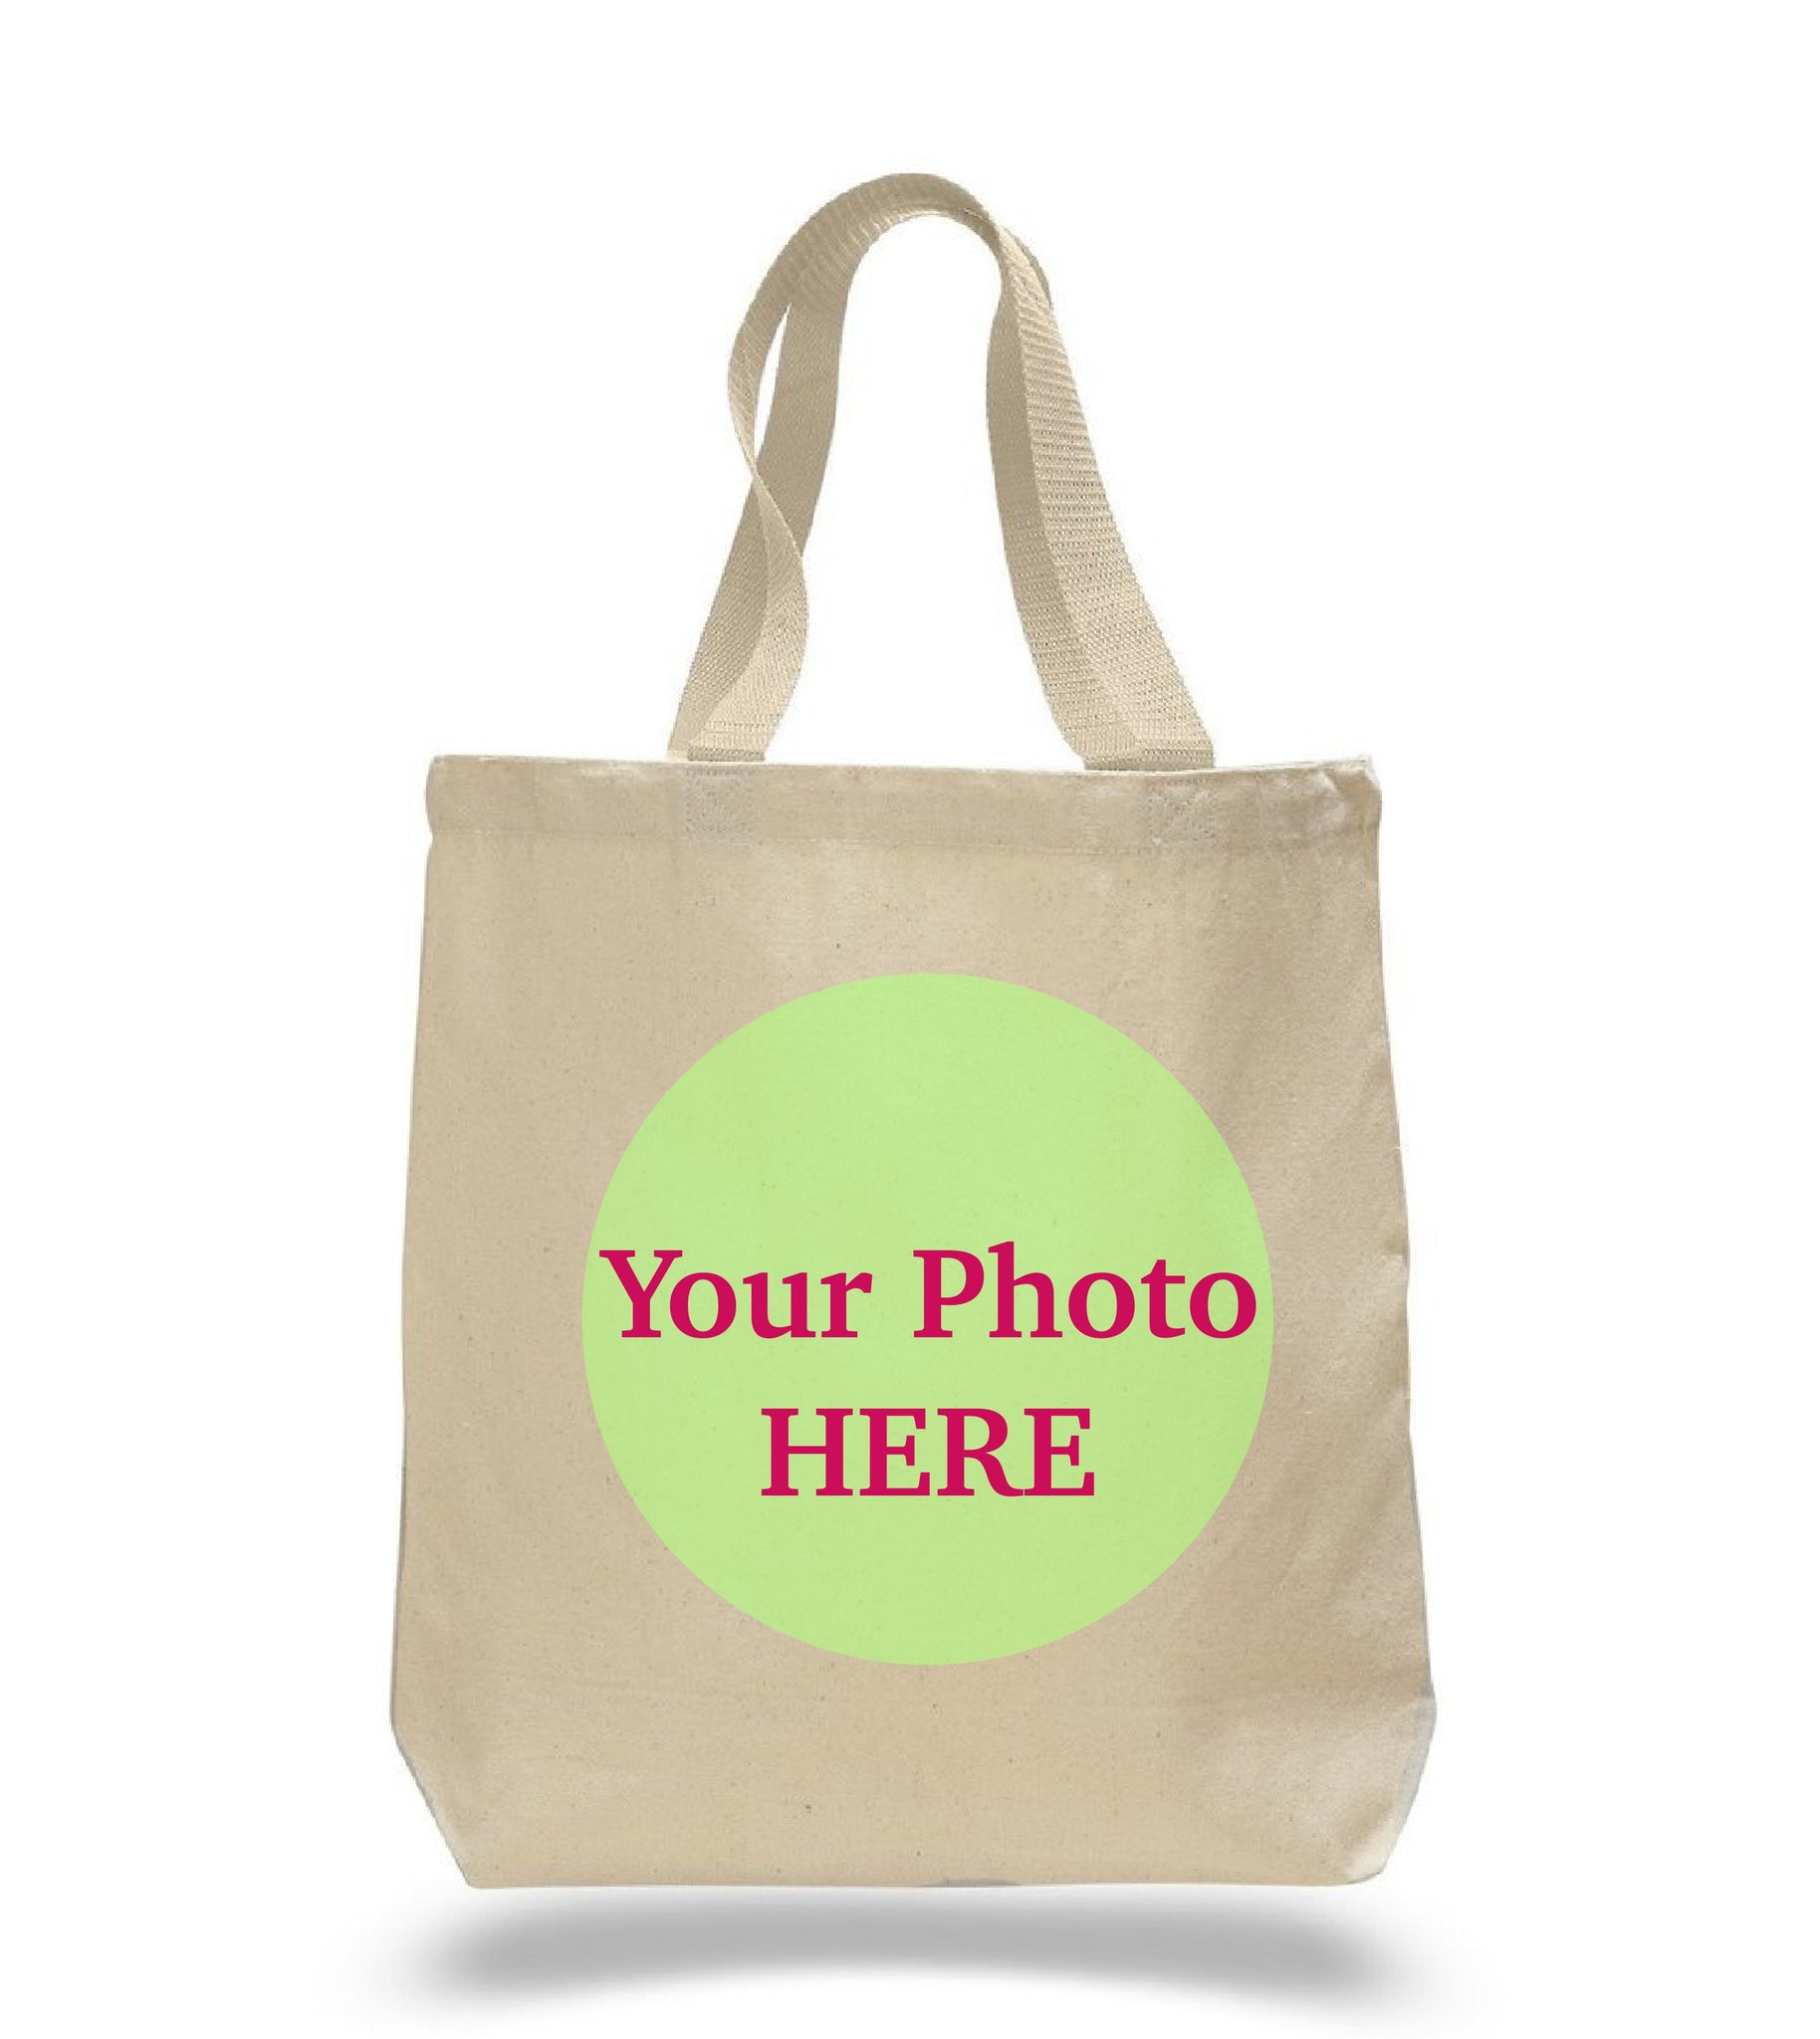 Personalized Tote Bags & Custom Canvas Totes